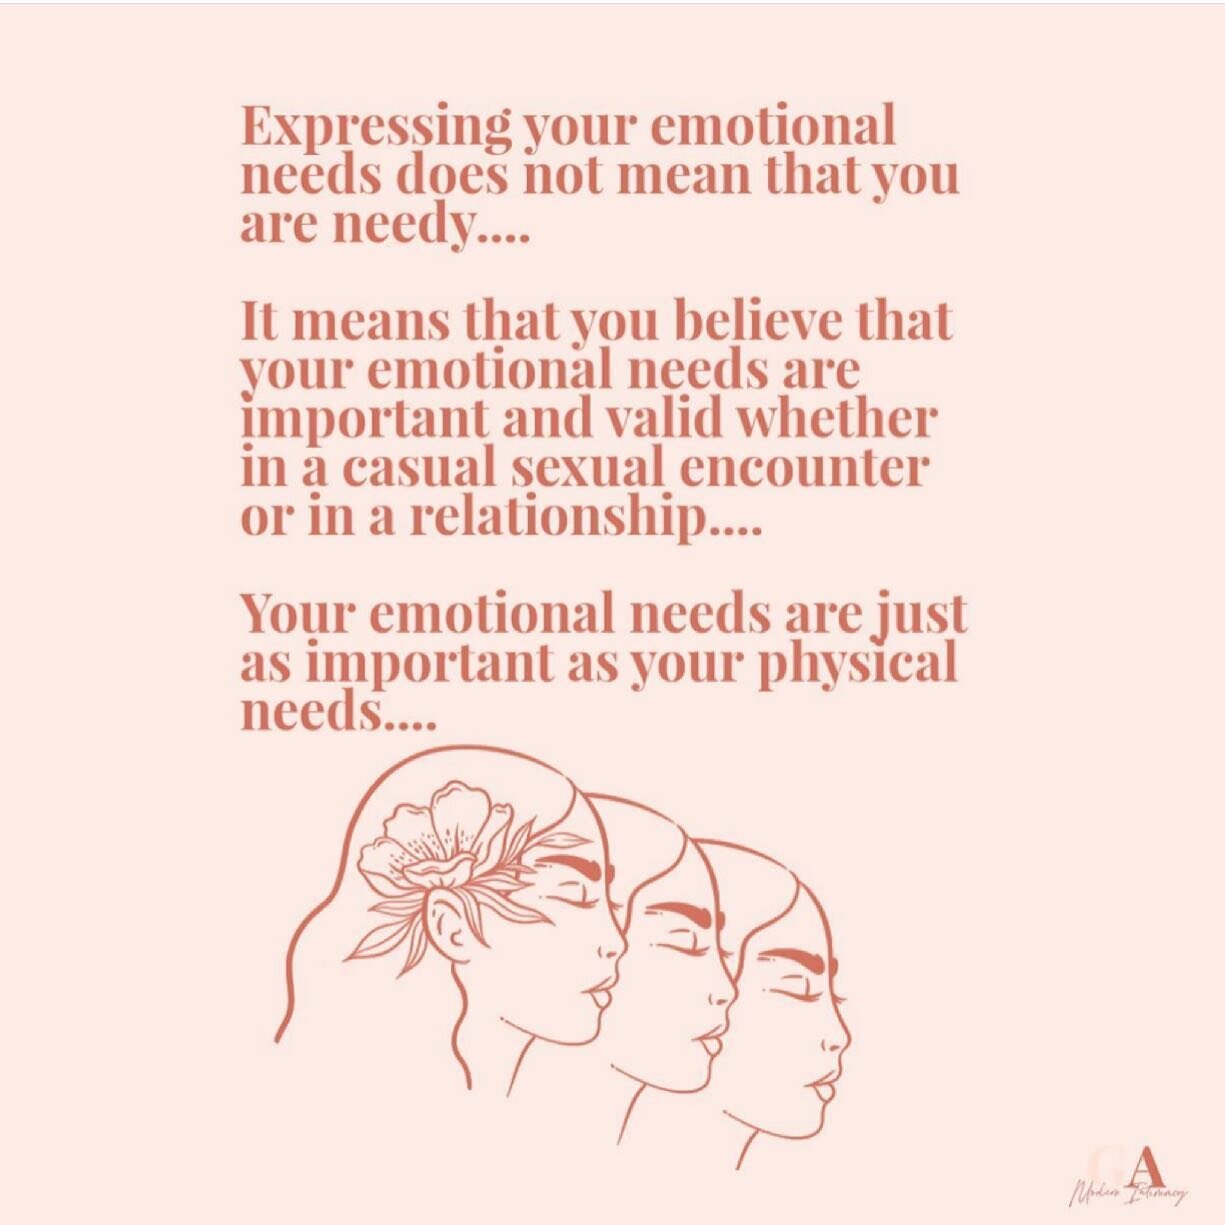 Today&rsquo;s Reminder 🤍

With love, Greer xo

#education #intimacy #teen #romance #loveeducation #relationships #relationshipeducation #selflove #selfkindness #sex #counselling #emotions #therapy #consent
#counsellor #s3xed #s3xeducation